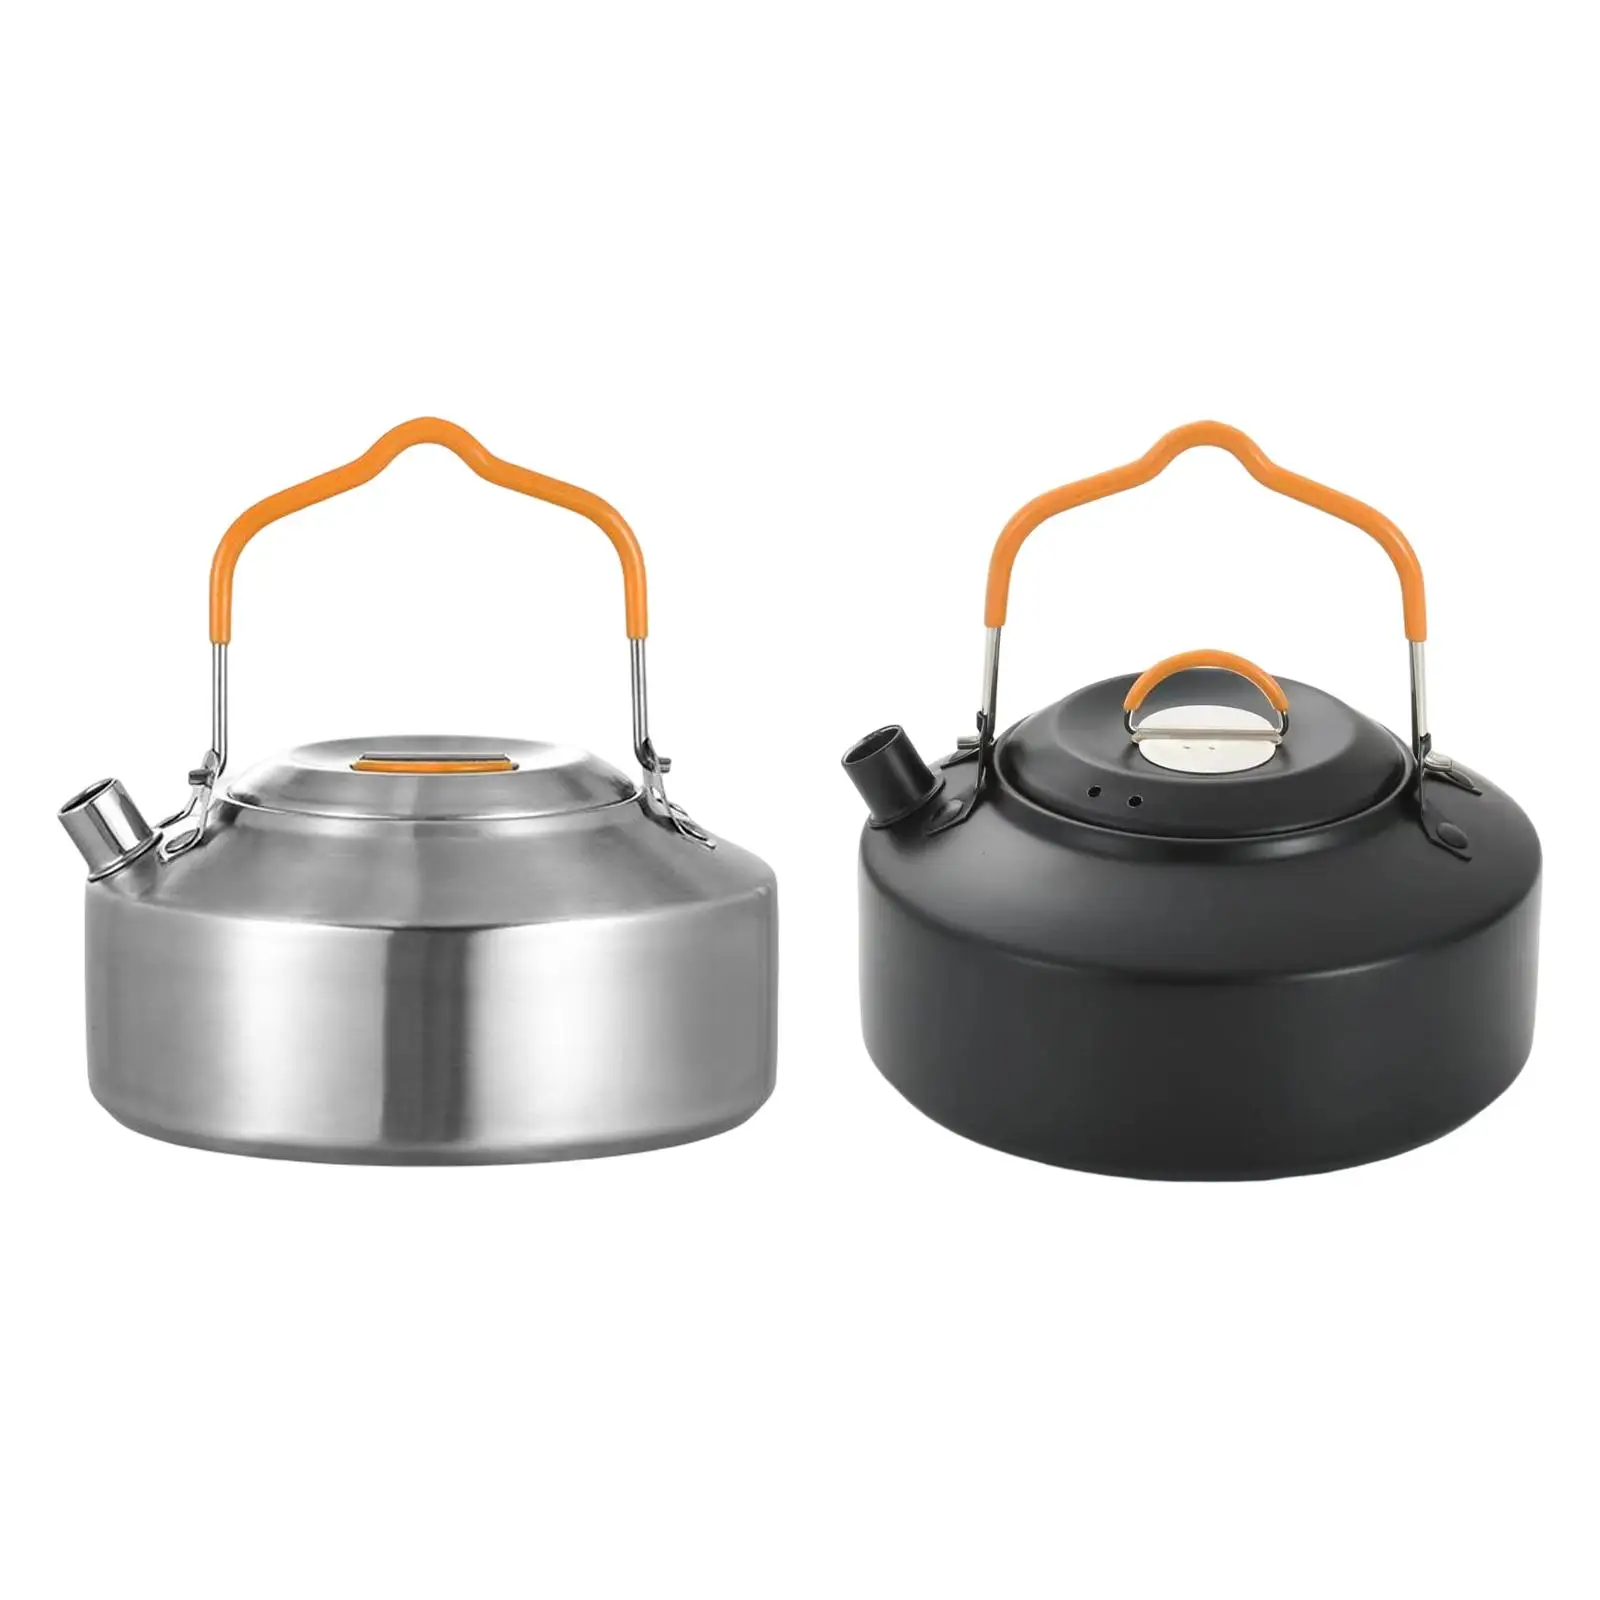 Lightweight Outdoor Tea Coffee Pot Teapot with Handle Cookware Kitchenware Campfire Camping Kettle for Garden Picnic Barbecue